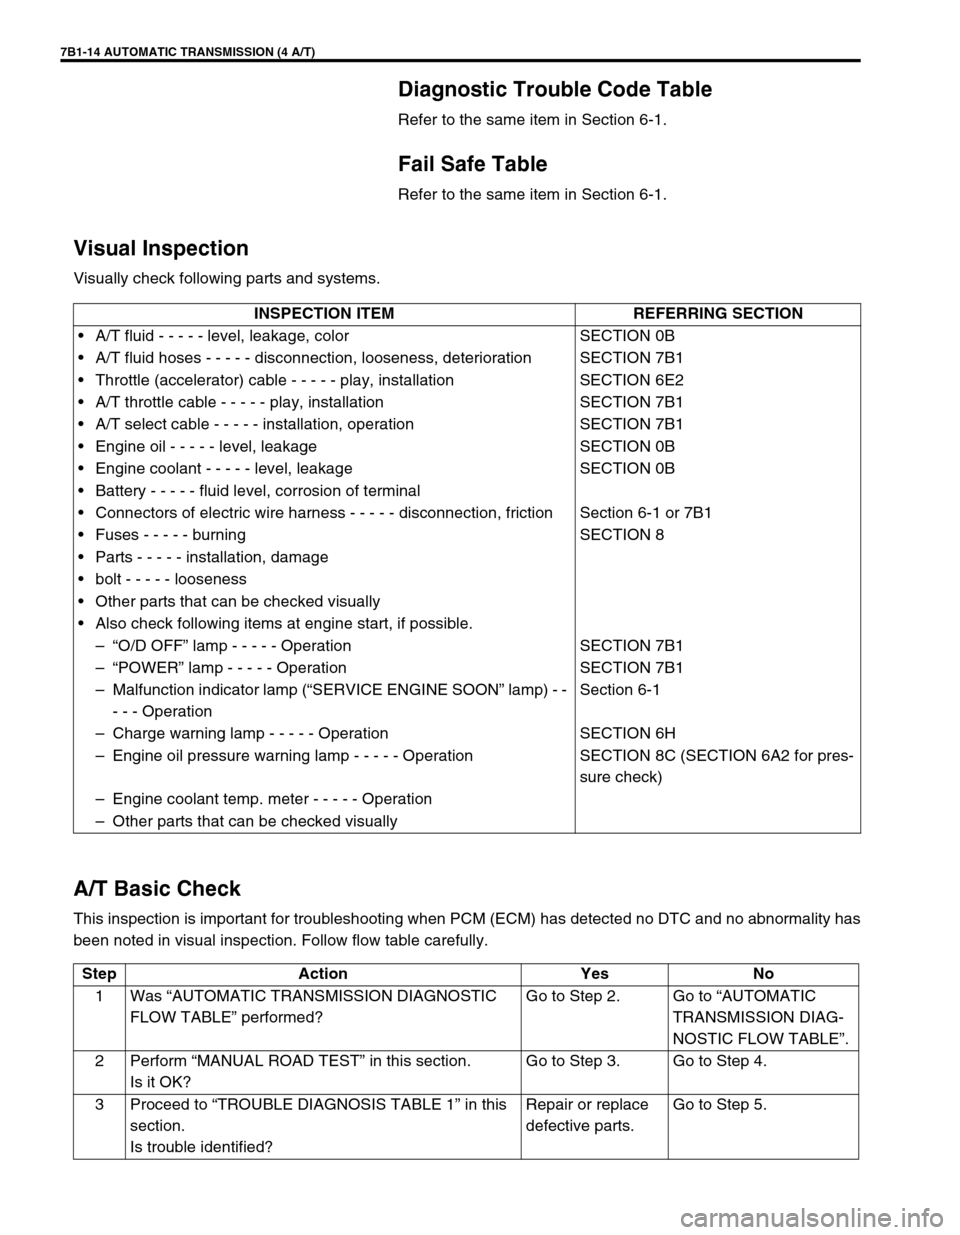 SUZUKI GRAND VITARA 1999 2.G Owners Manual 7B1-14 AUTOMATIC TRANSMISSION (4 A/T)
Diagnostic Trouble Code Table
Refer to the same item in Section 6-1.
Fail Safe Table
Refer to the same item in Section 6-1.
Visual Inspection
Visually check follo